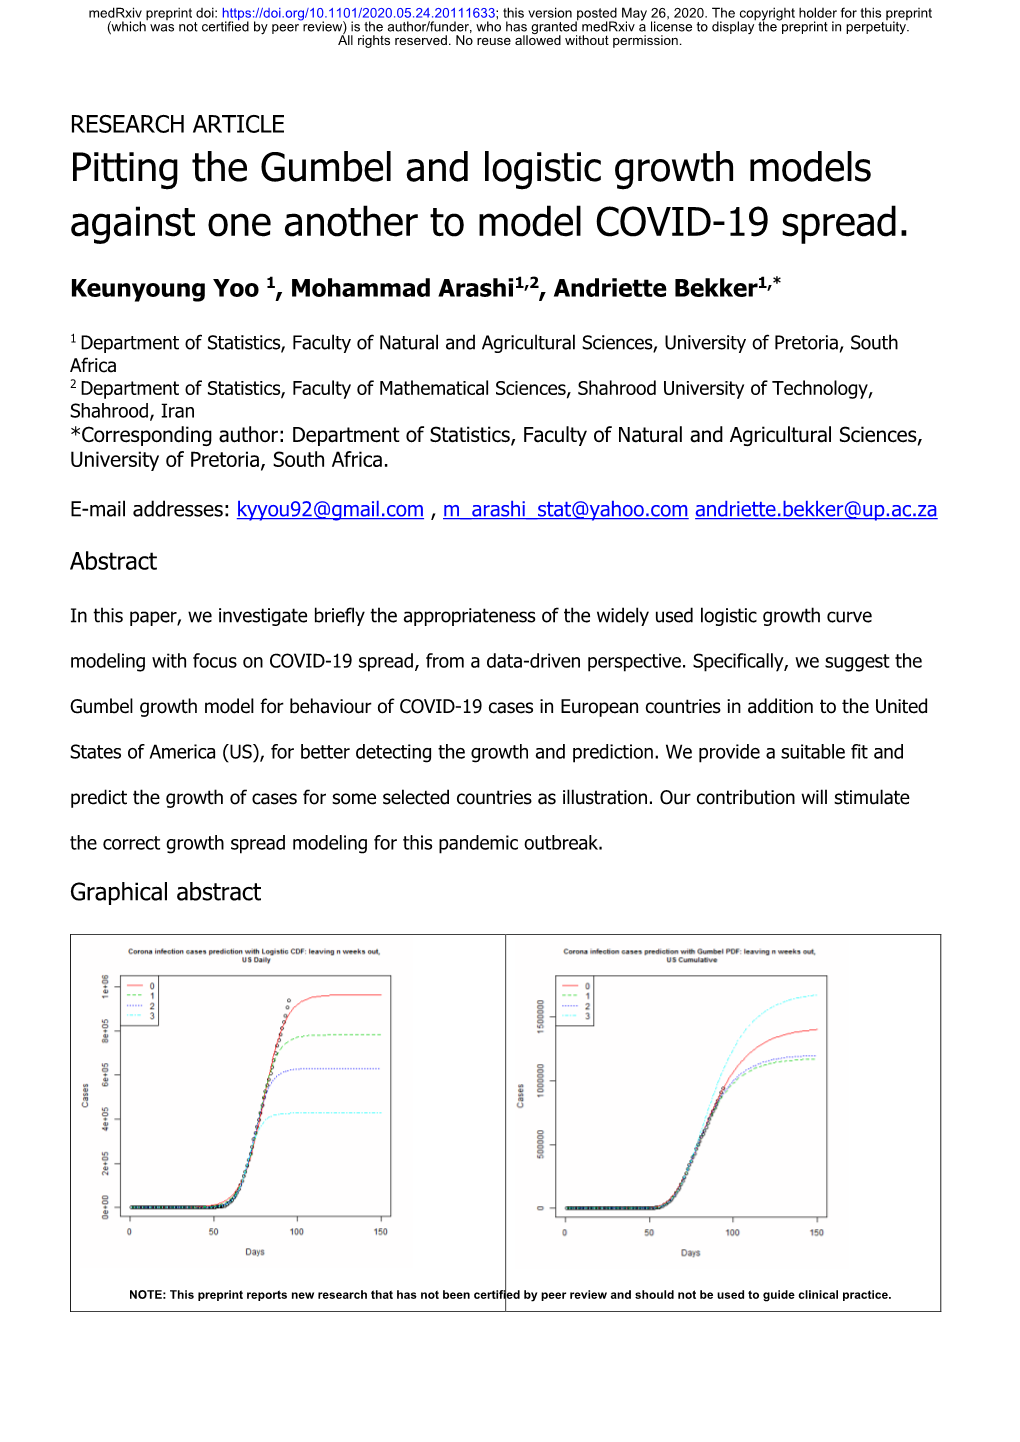 Pitting the Gumbel and Logistic Growth Models Against One Another to Model COVID-19 Spread